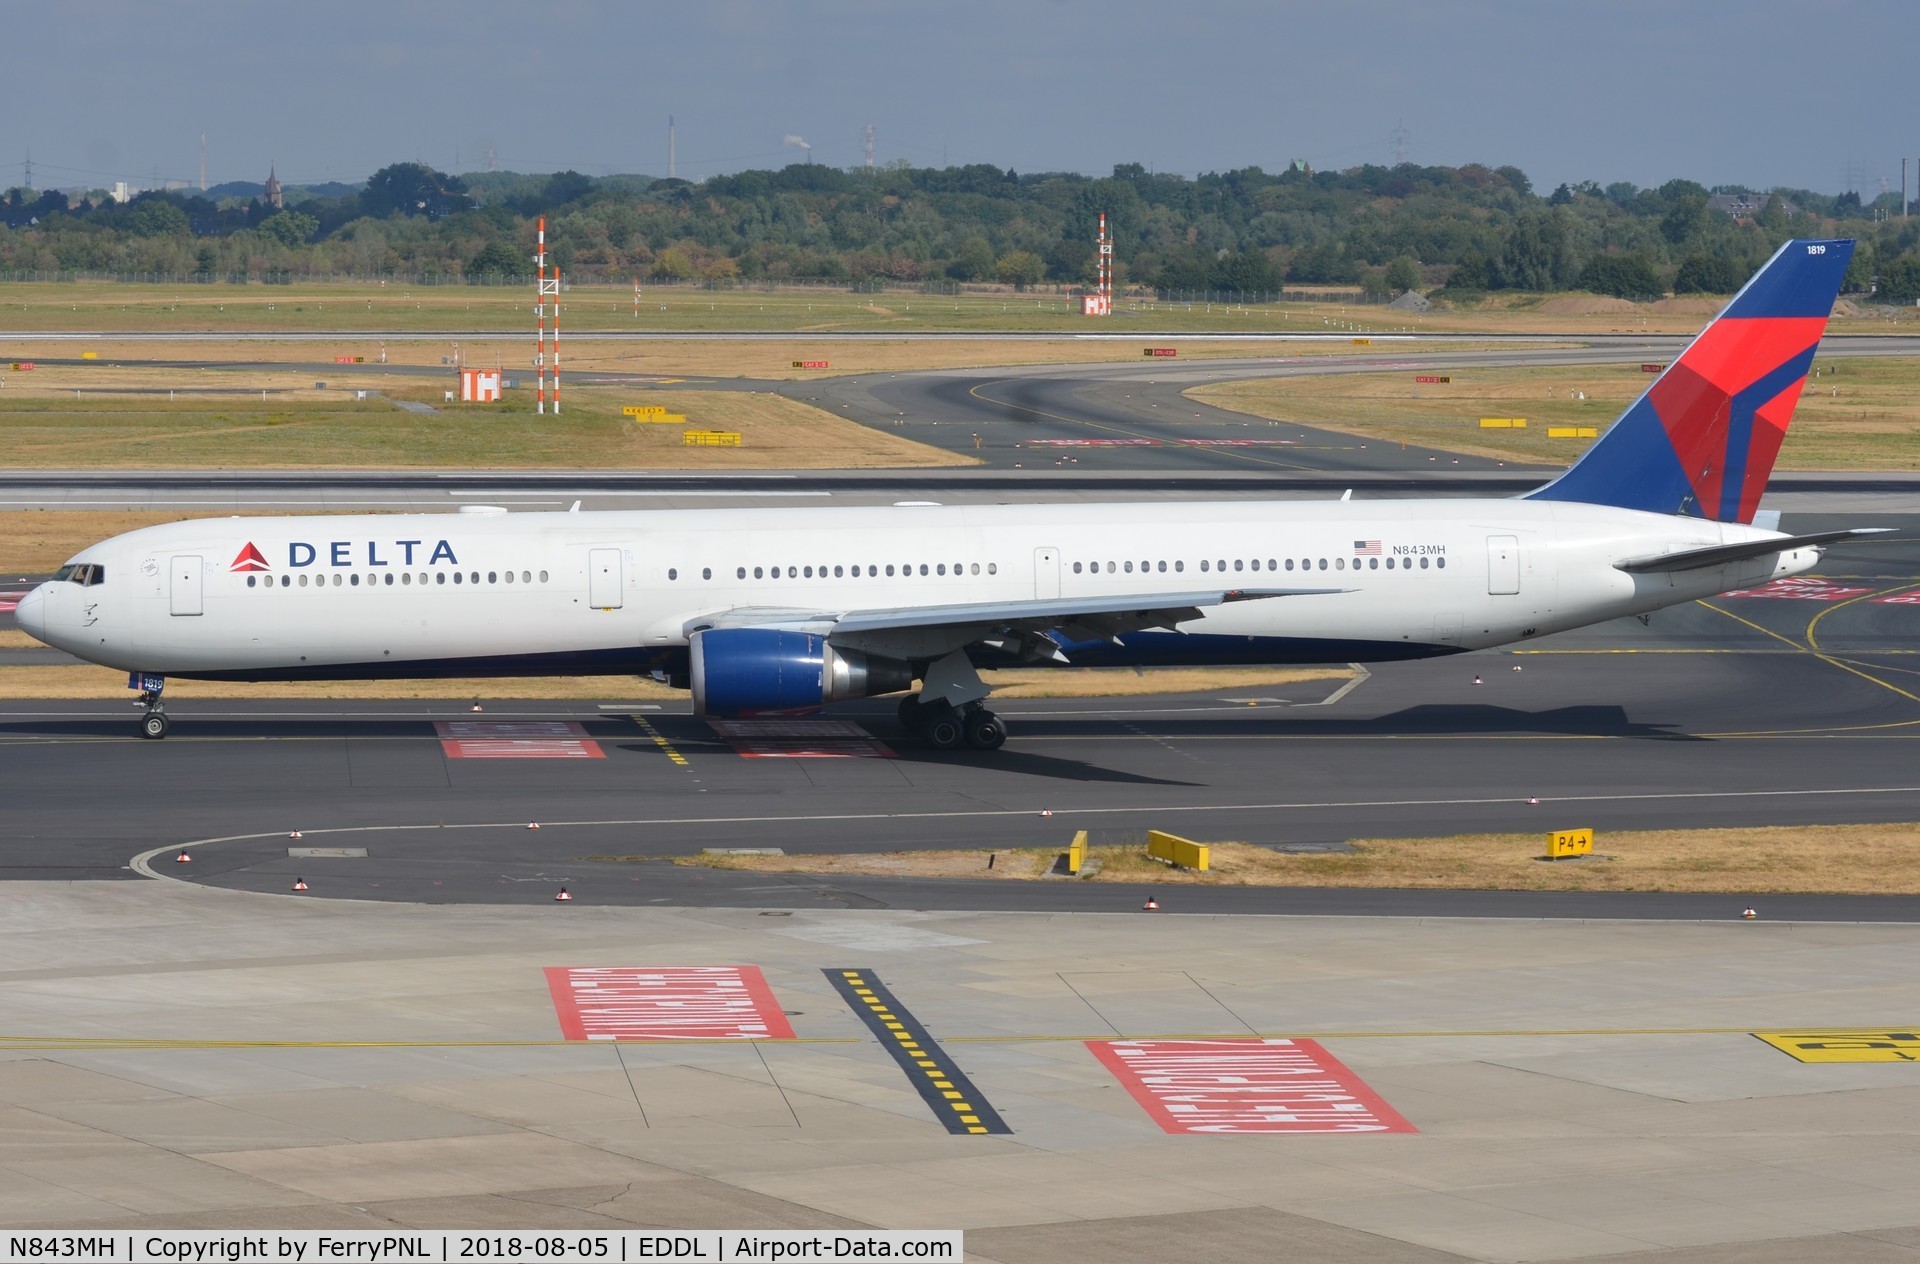 N843MH, 2002 Boeing 767-432/ER C/N 29716, Delta B764 taxying out.